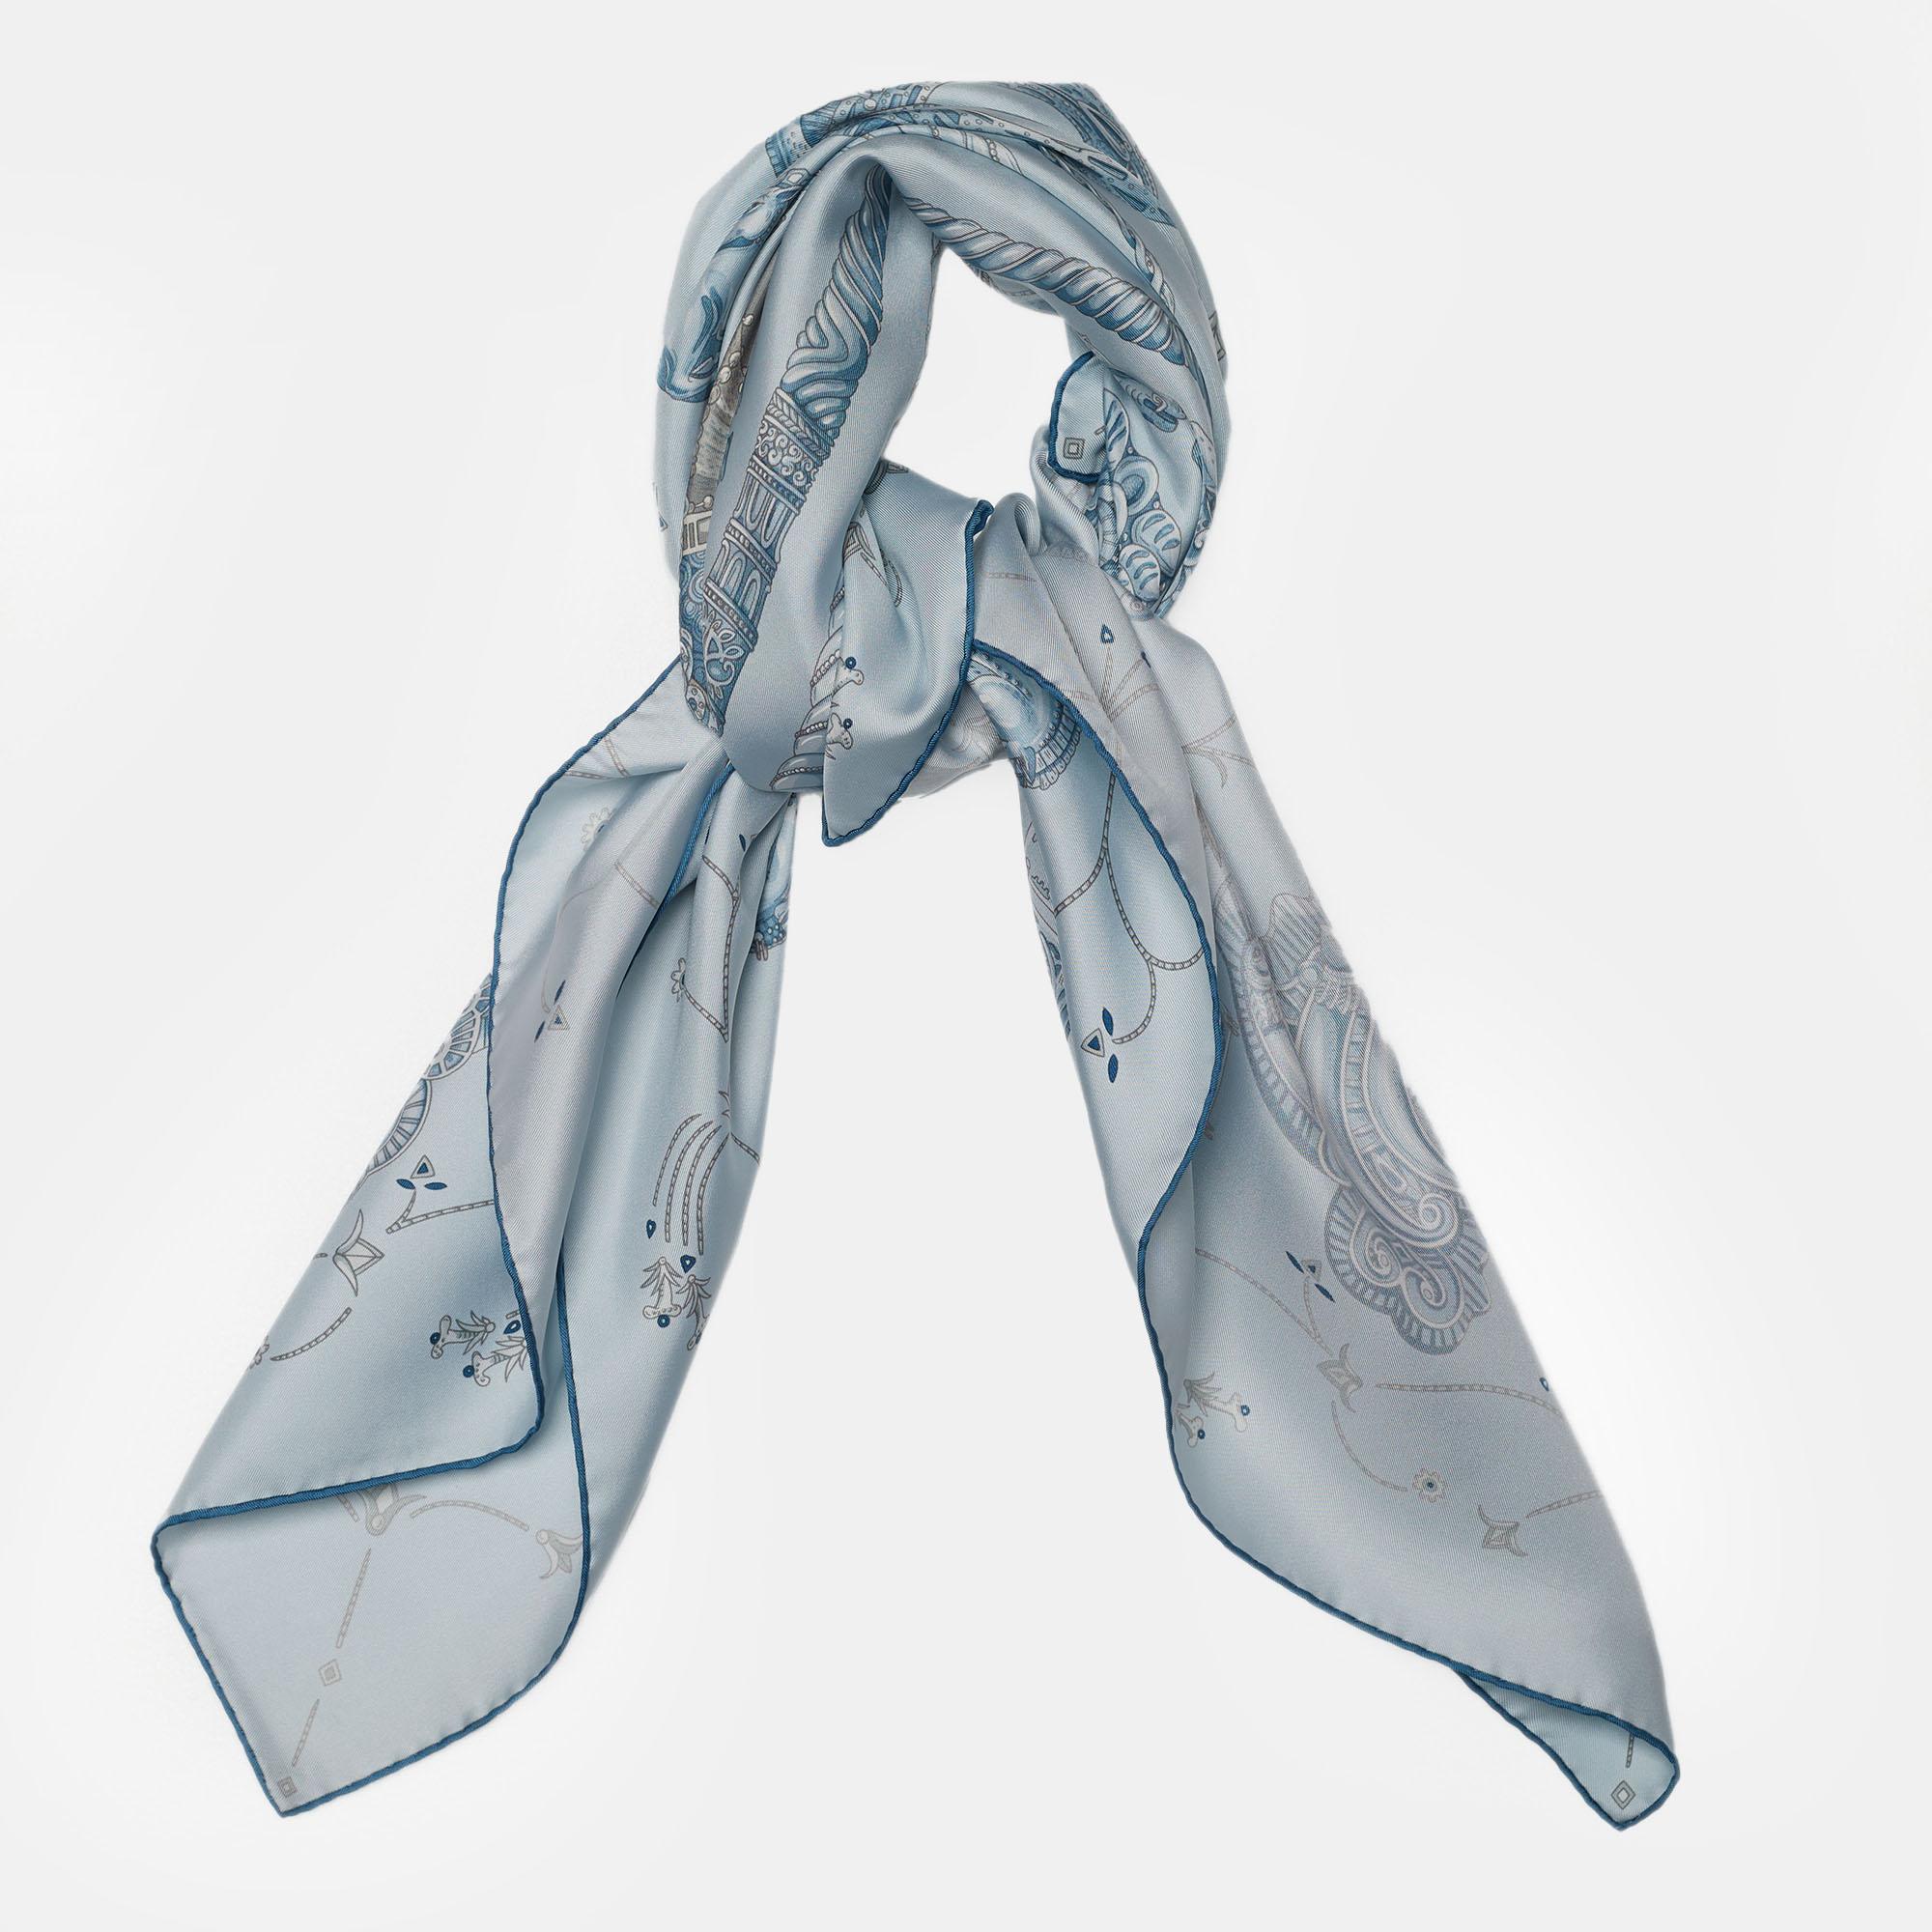 An essential Hermès accessory, the label's scarves are as iconic as any other creation from the brand and are collector's favorites. This rendition is carefully cut from luxurious silk and designed with the Ors Nomades print, showcasing the label's